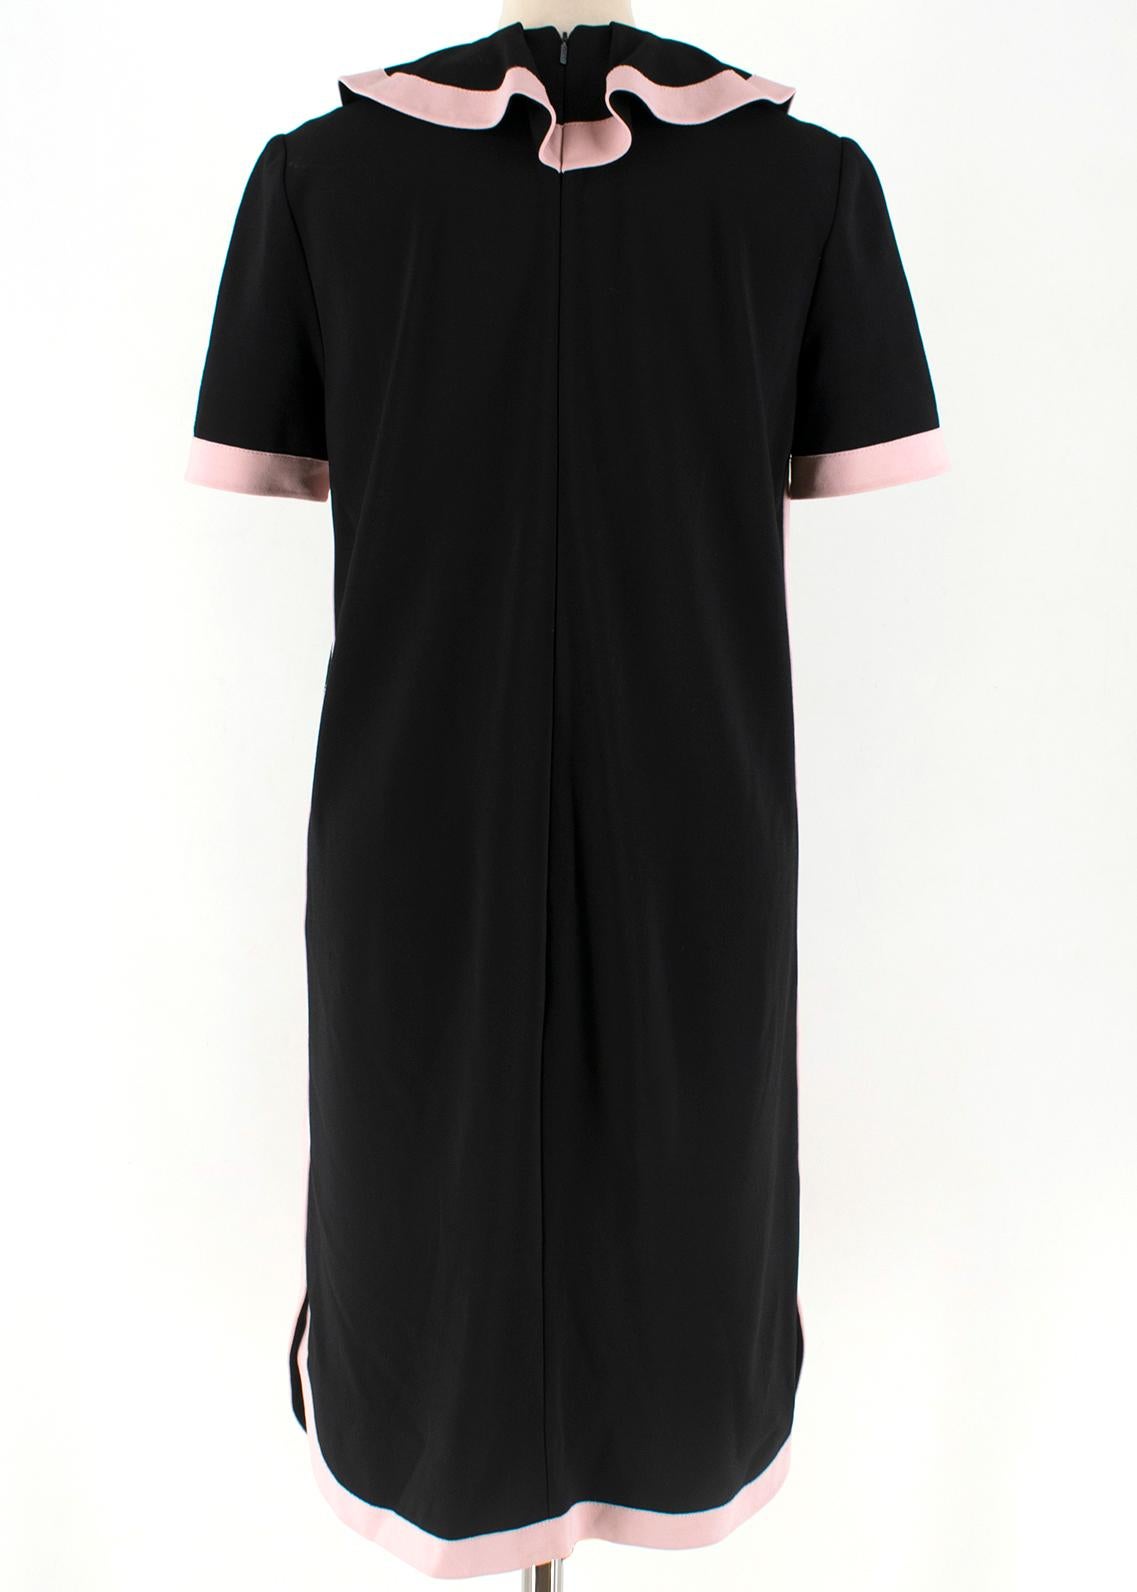 Gucci Black Ruffle Front Dress W/ Pink Trim M In Excellent Condition For Sale In London, GB